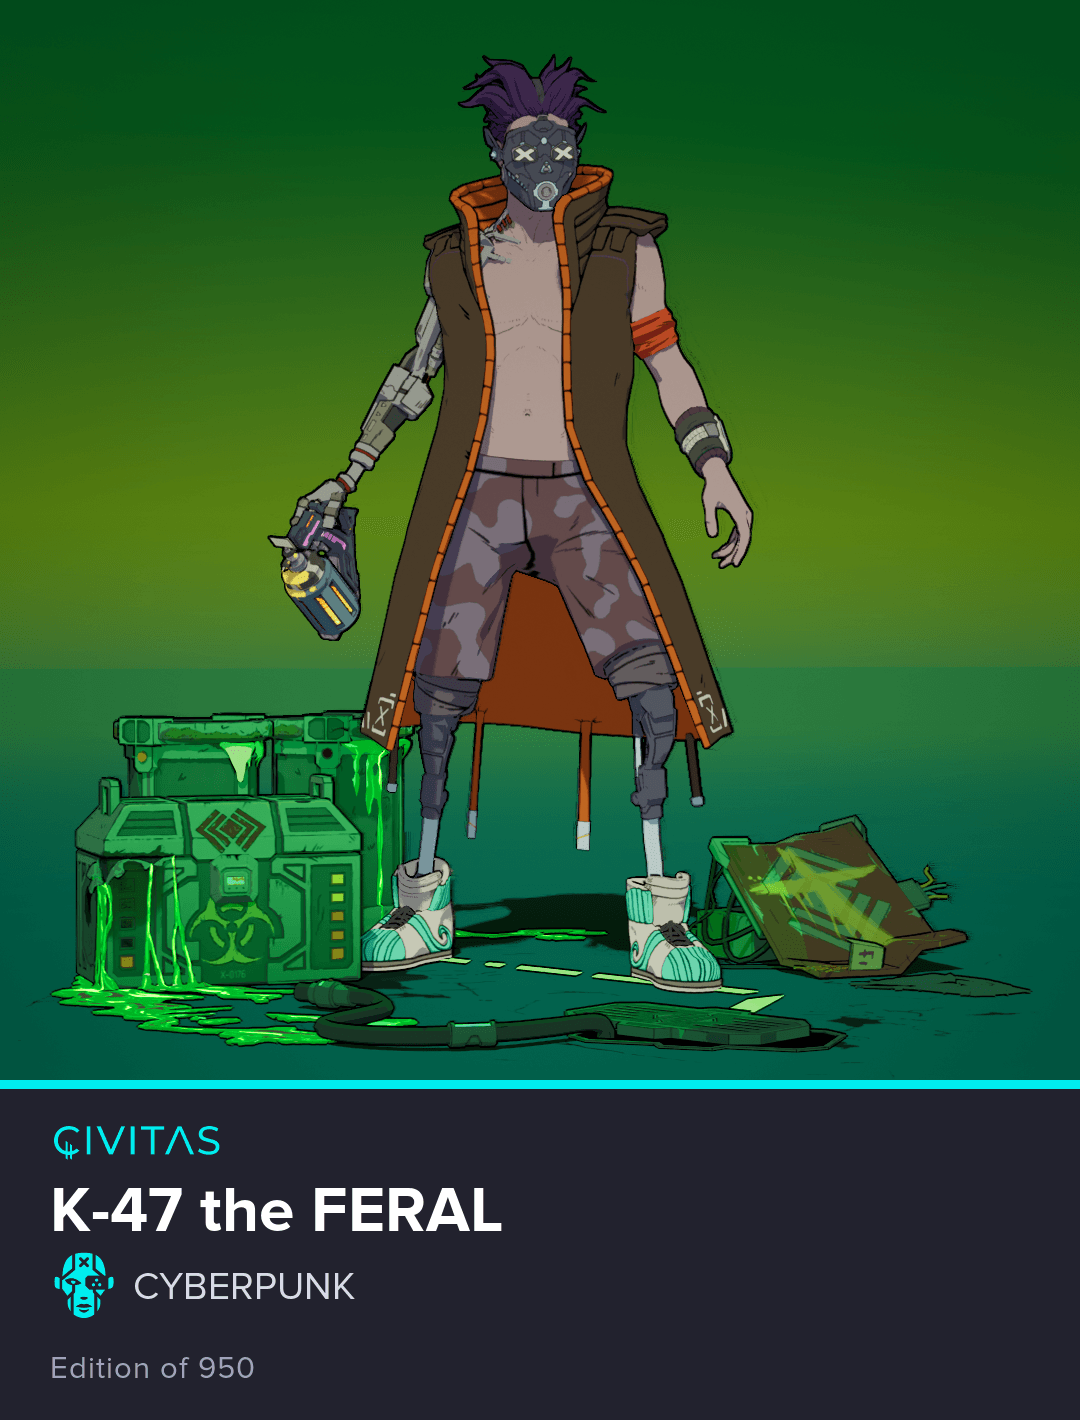 K-47 the Feral #418